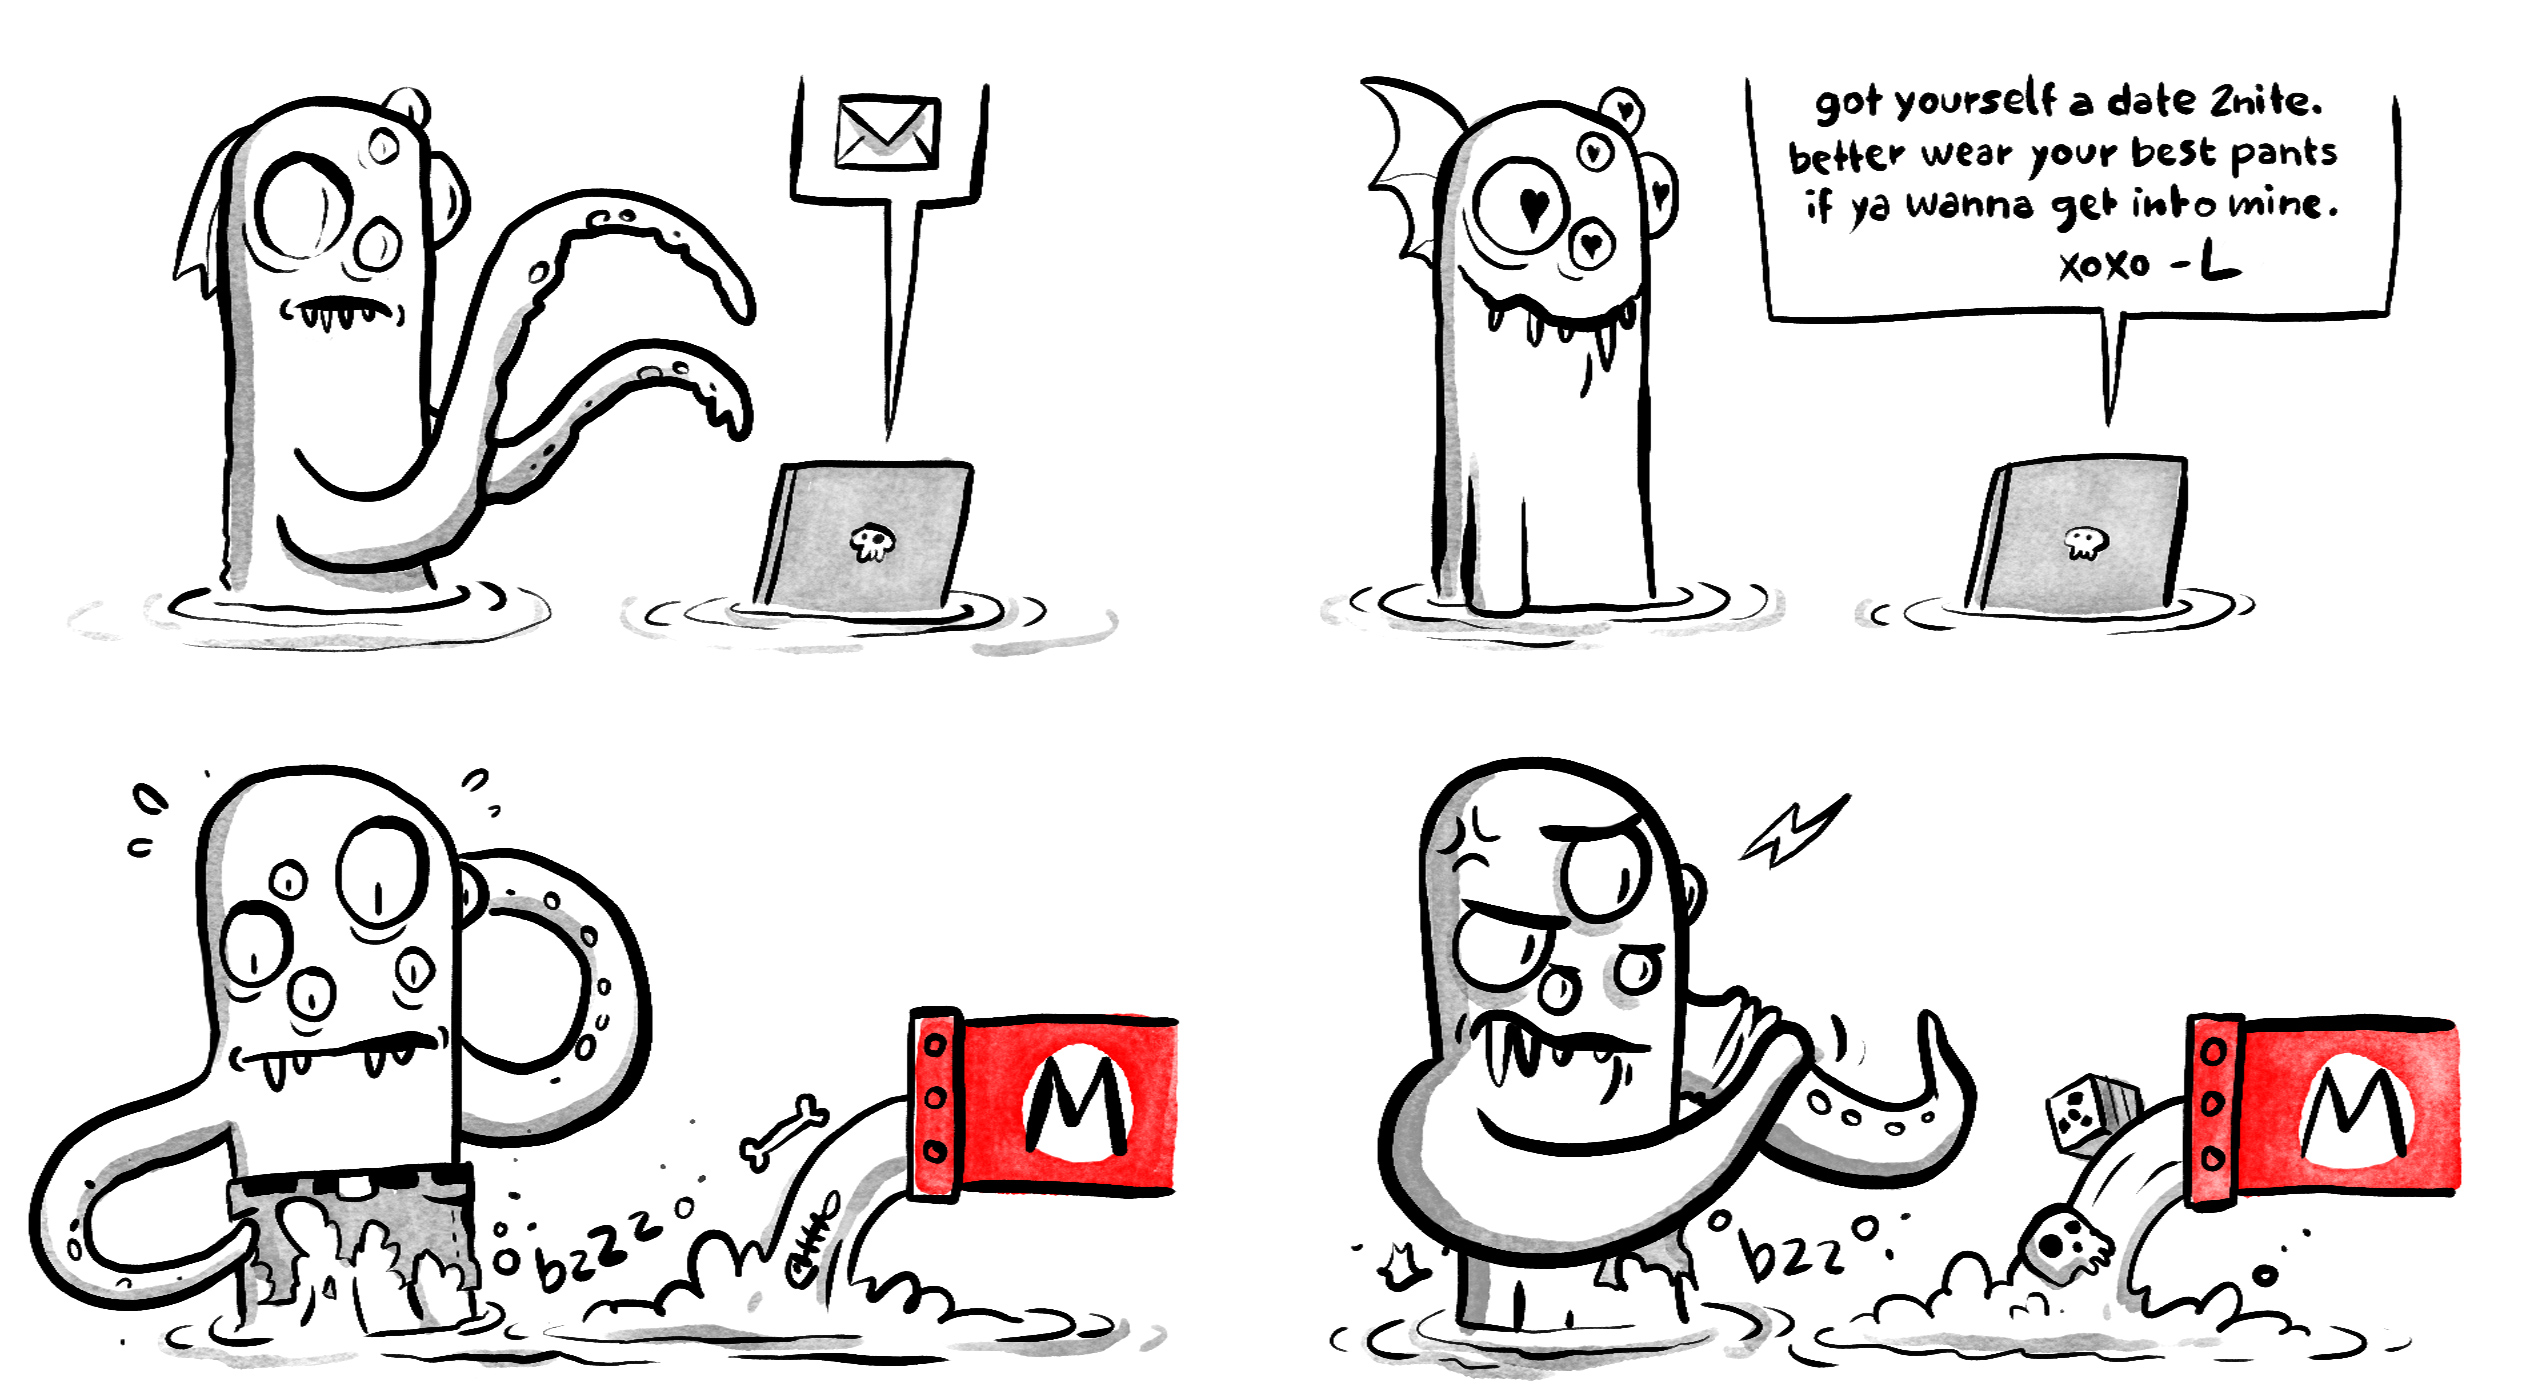 A tentacular creature takes a bath in toxic waste and reads an email on a computer about a date